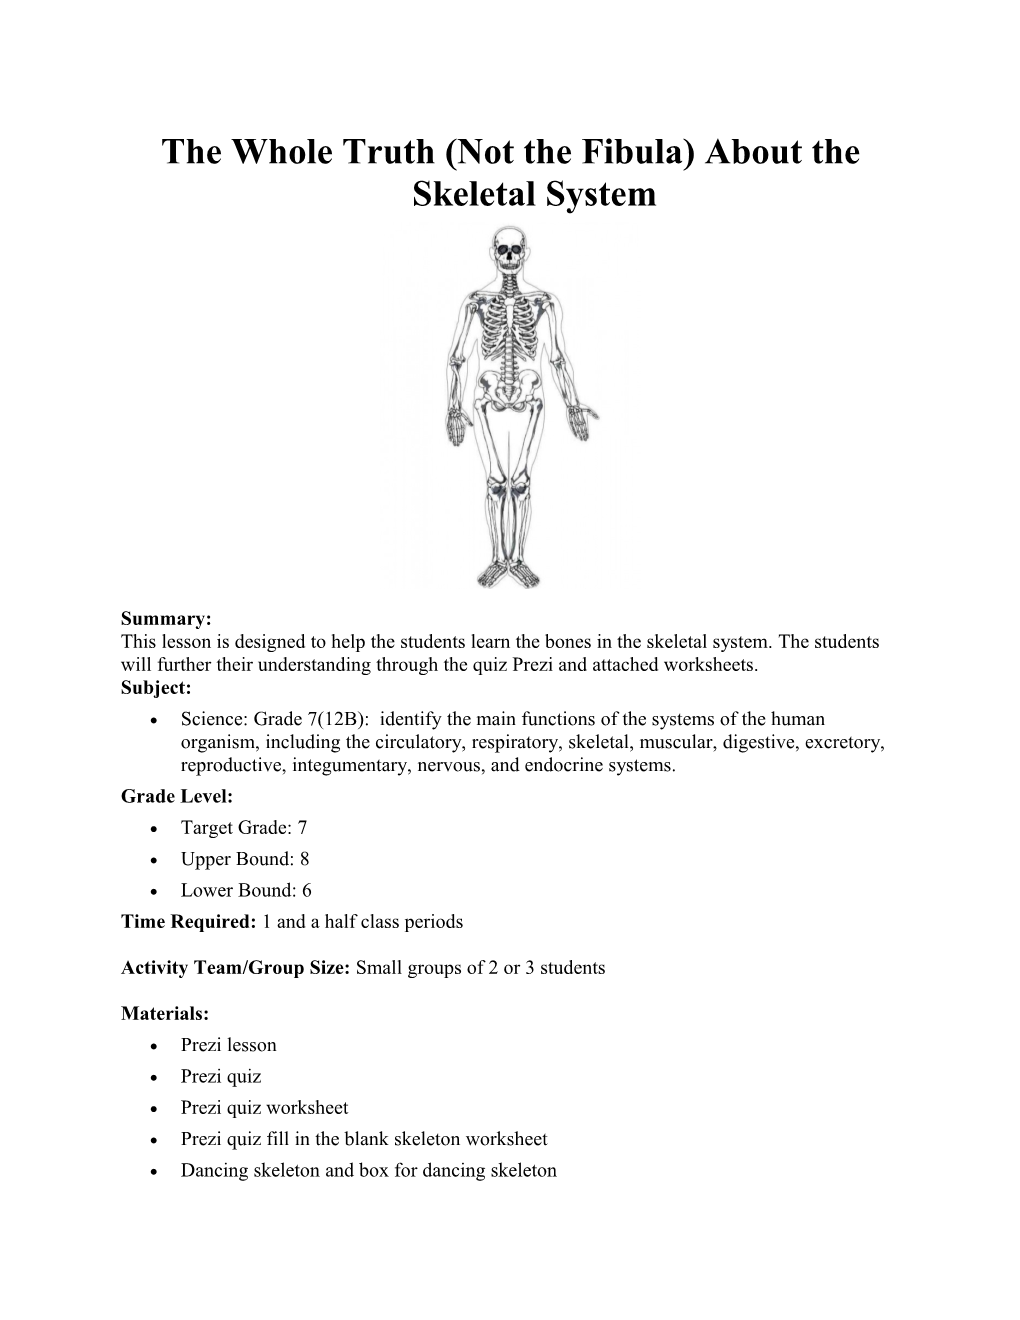 The Whole Truth (Not the Fibula) About the Skeletal System